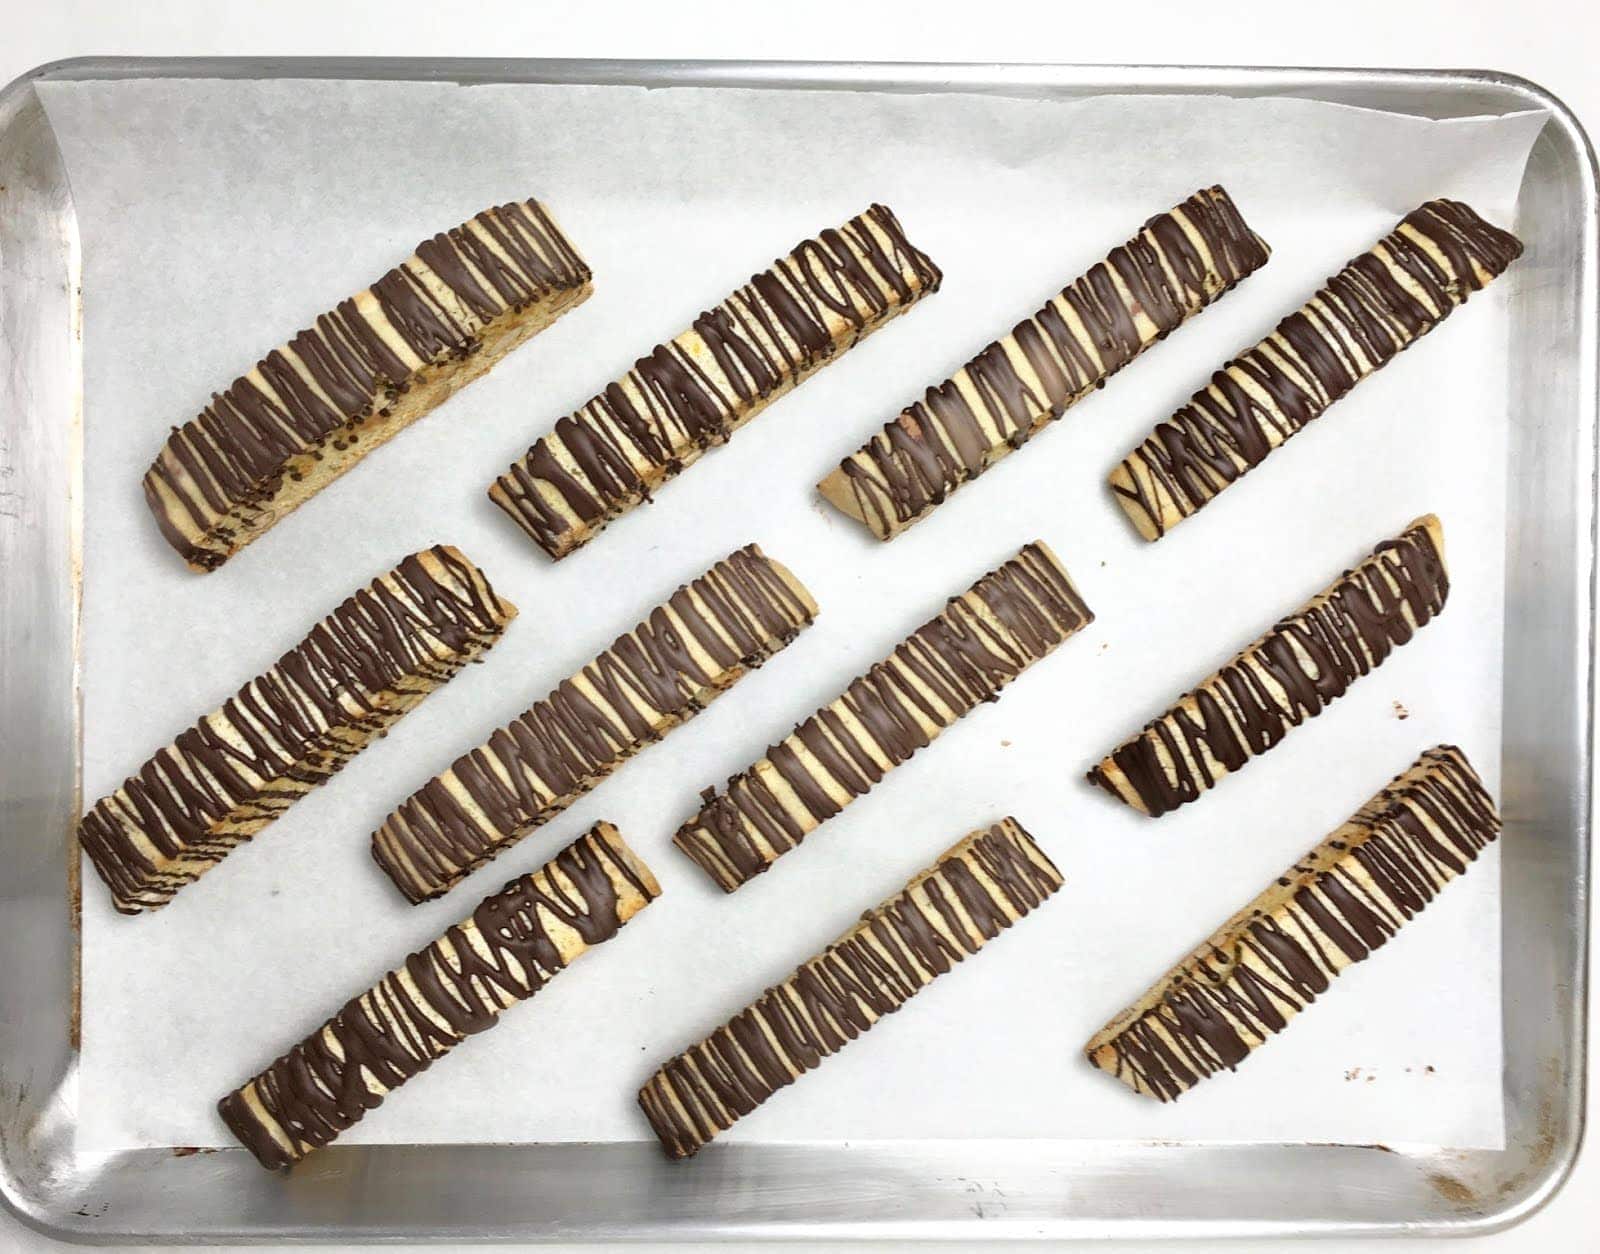 The best authentic Italian biscotti recipe is here.